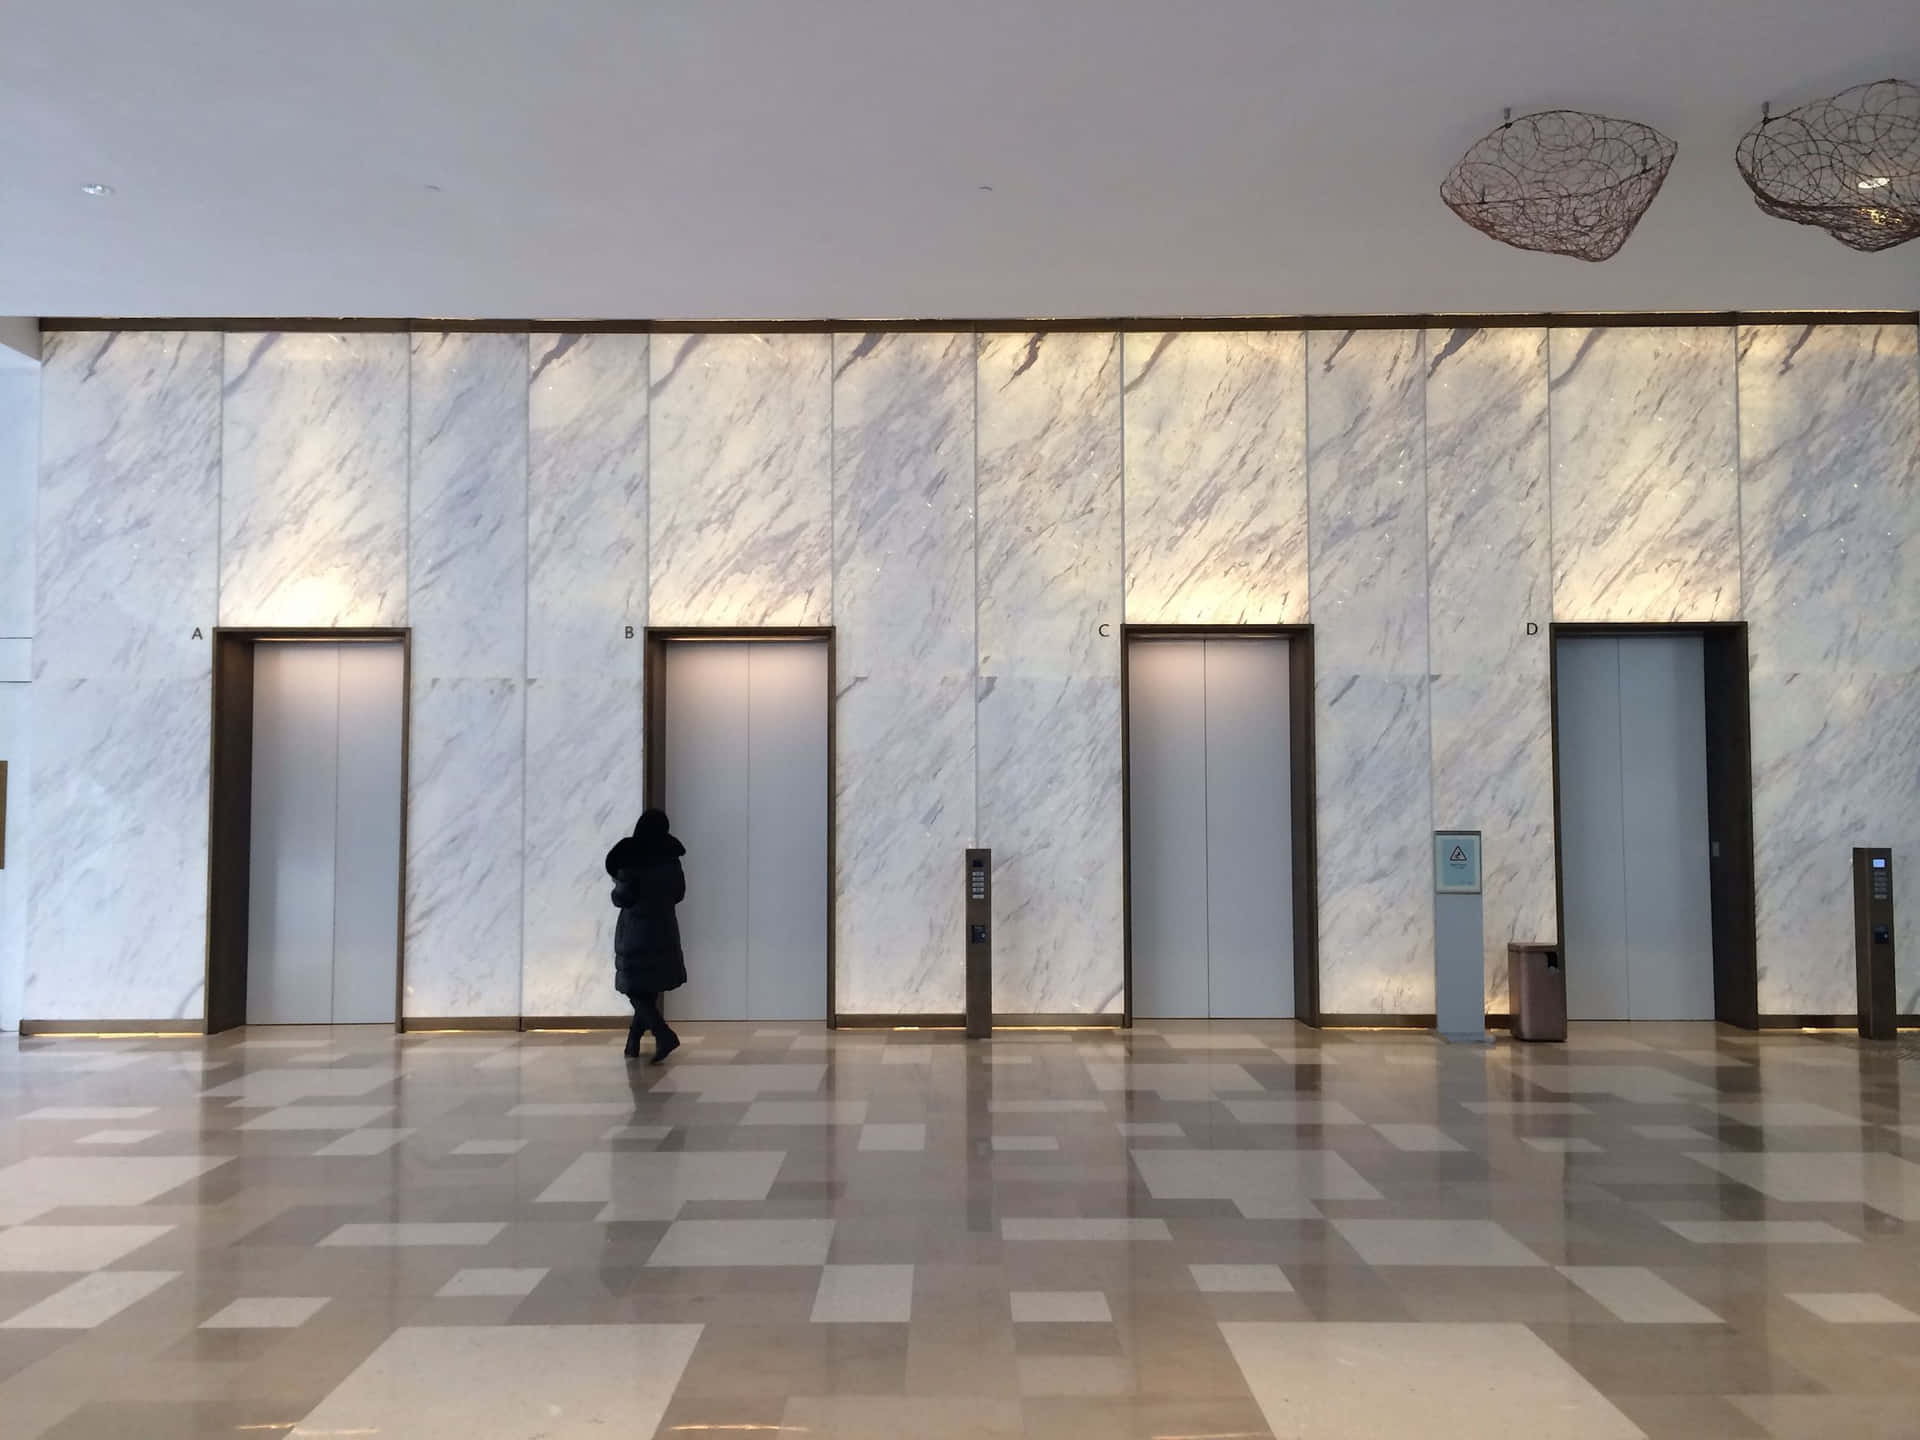 A Person Walking Through A Lobby With Marble Floors